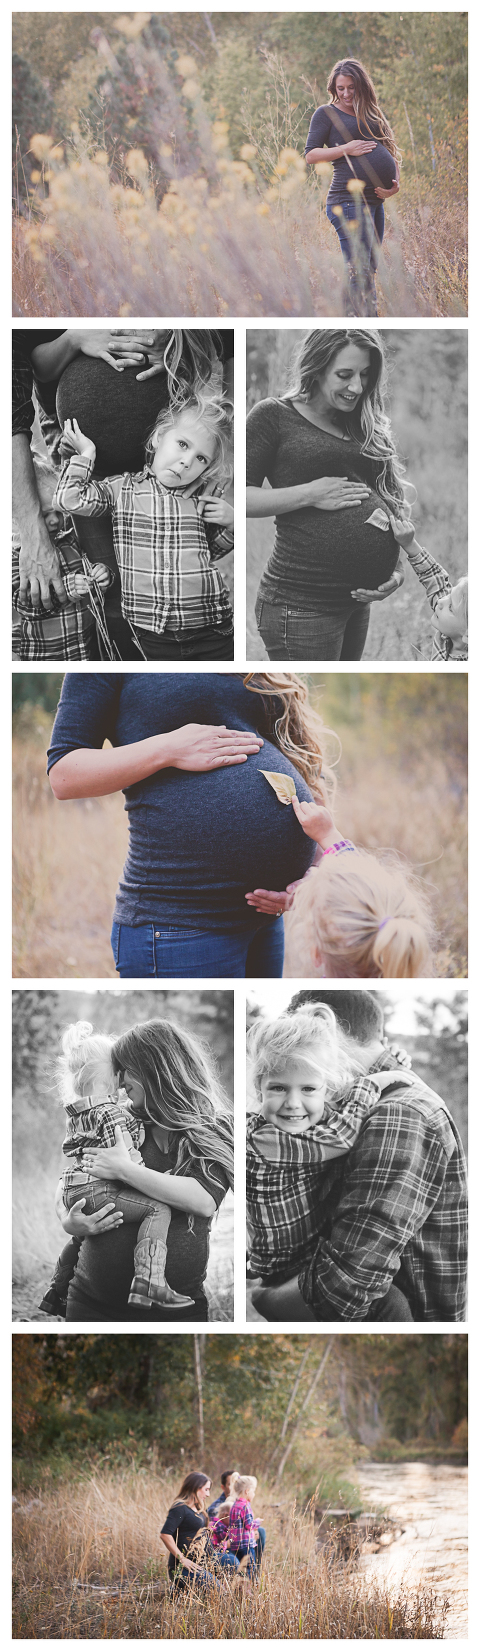 Taylor twins on the way, lifestyle maternity session by Hailey Haberman in Ellensburg WA